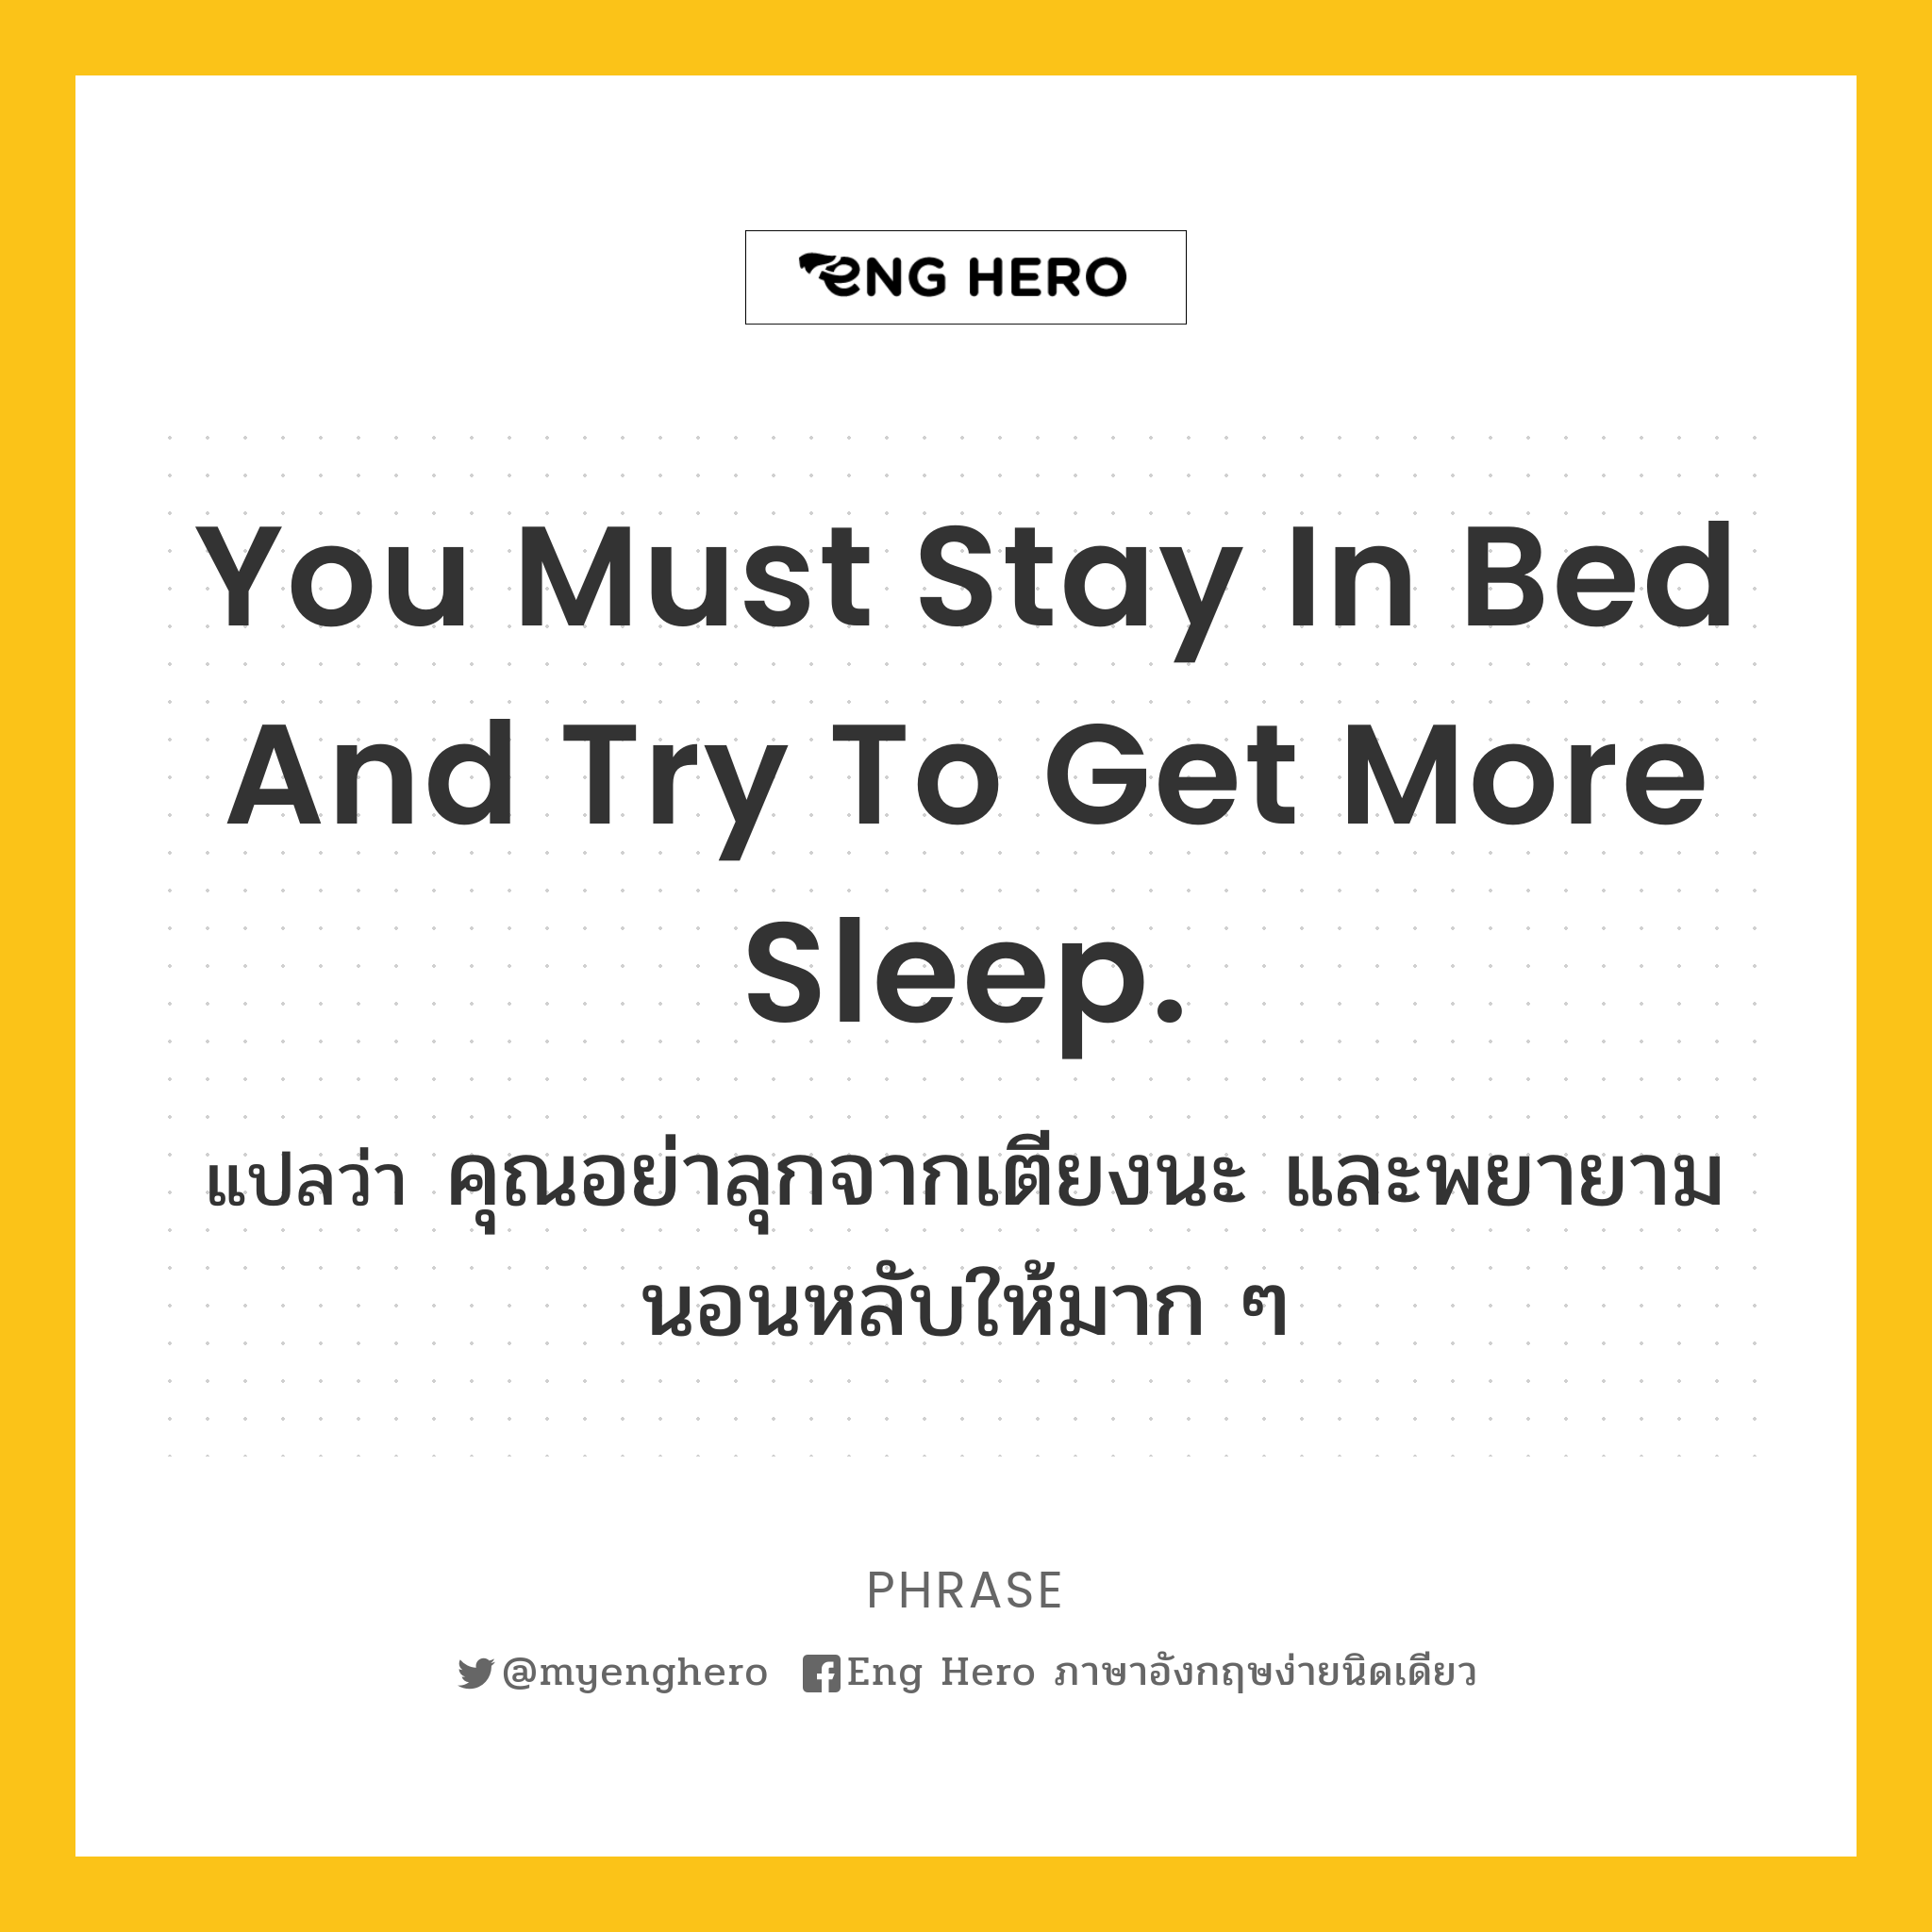 You must stay in bed and try to get more sleep.